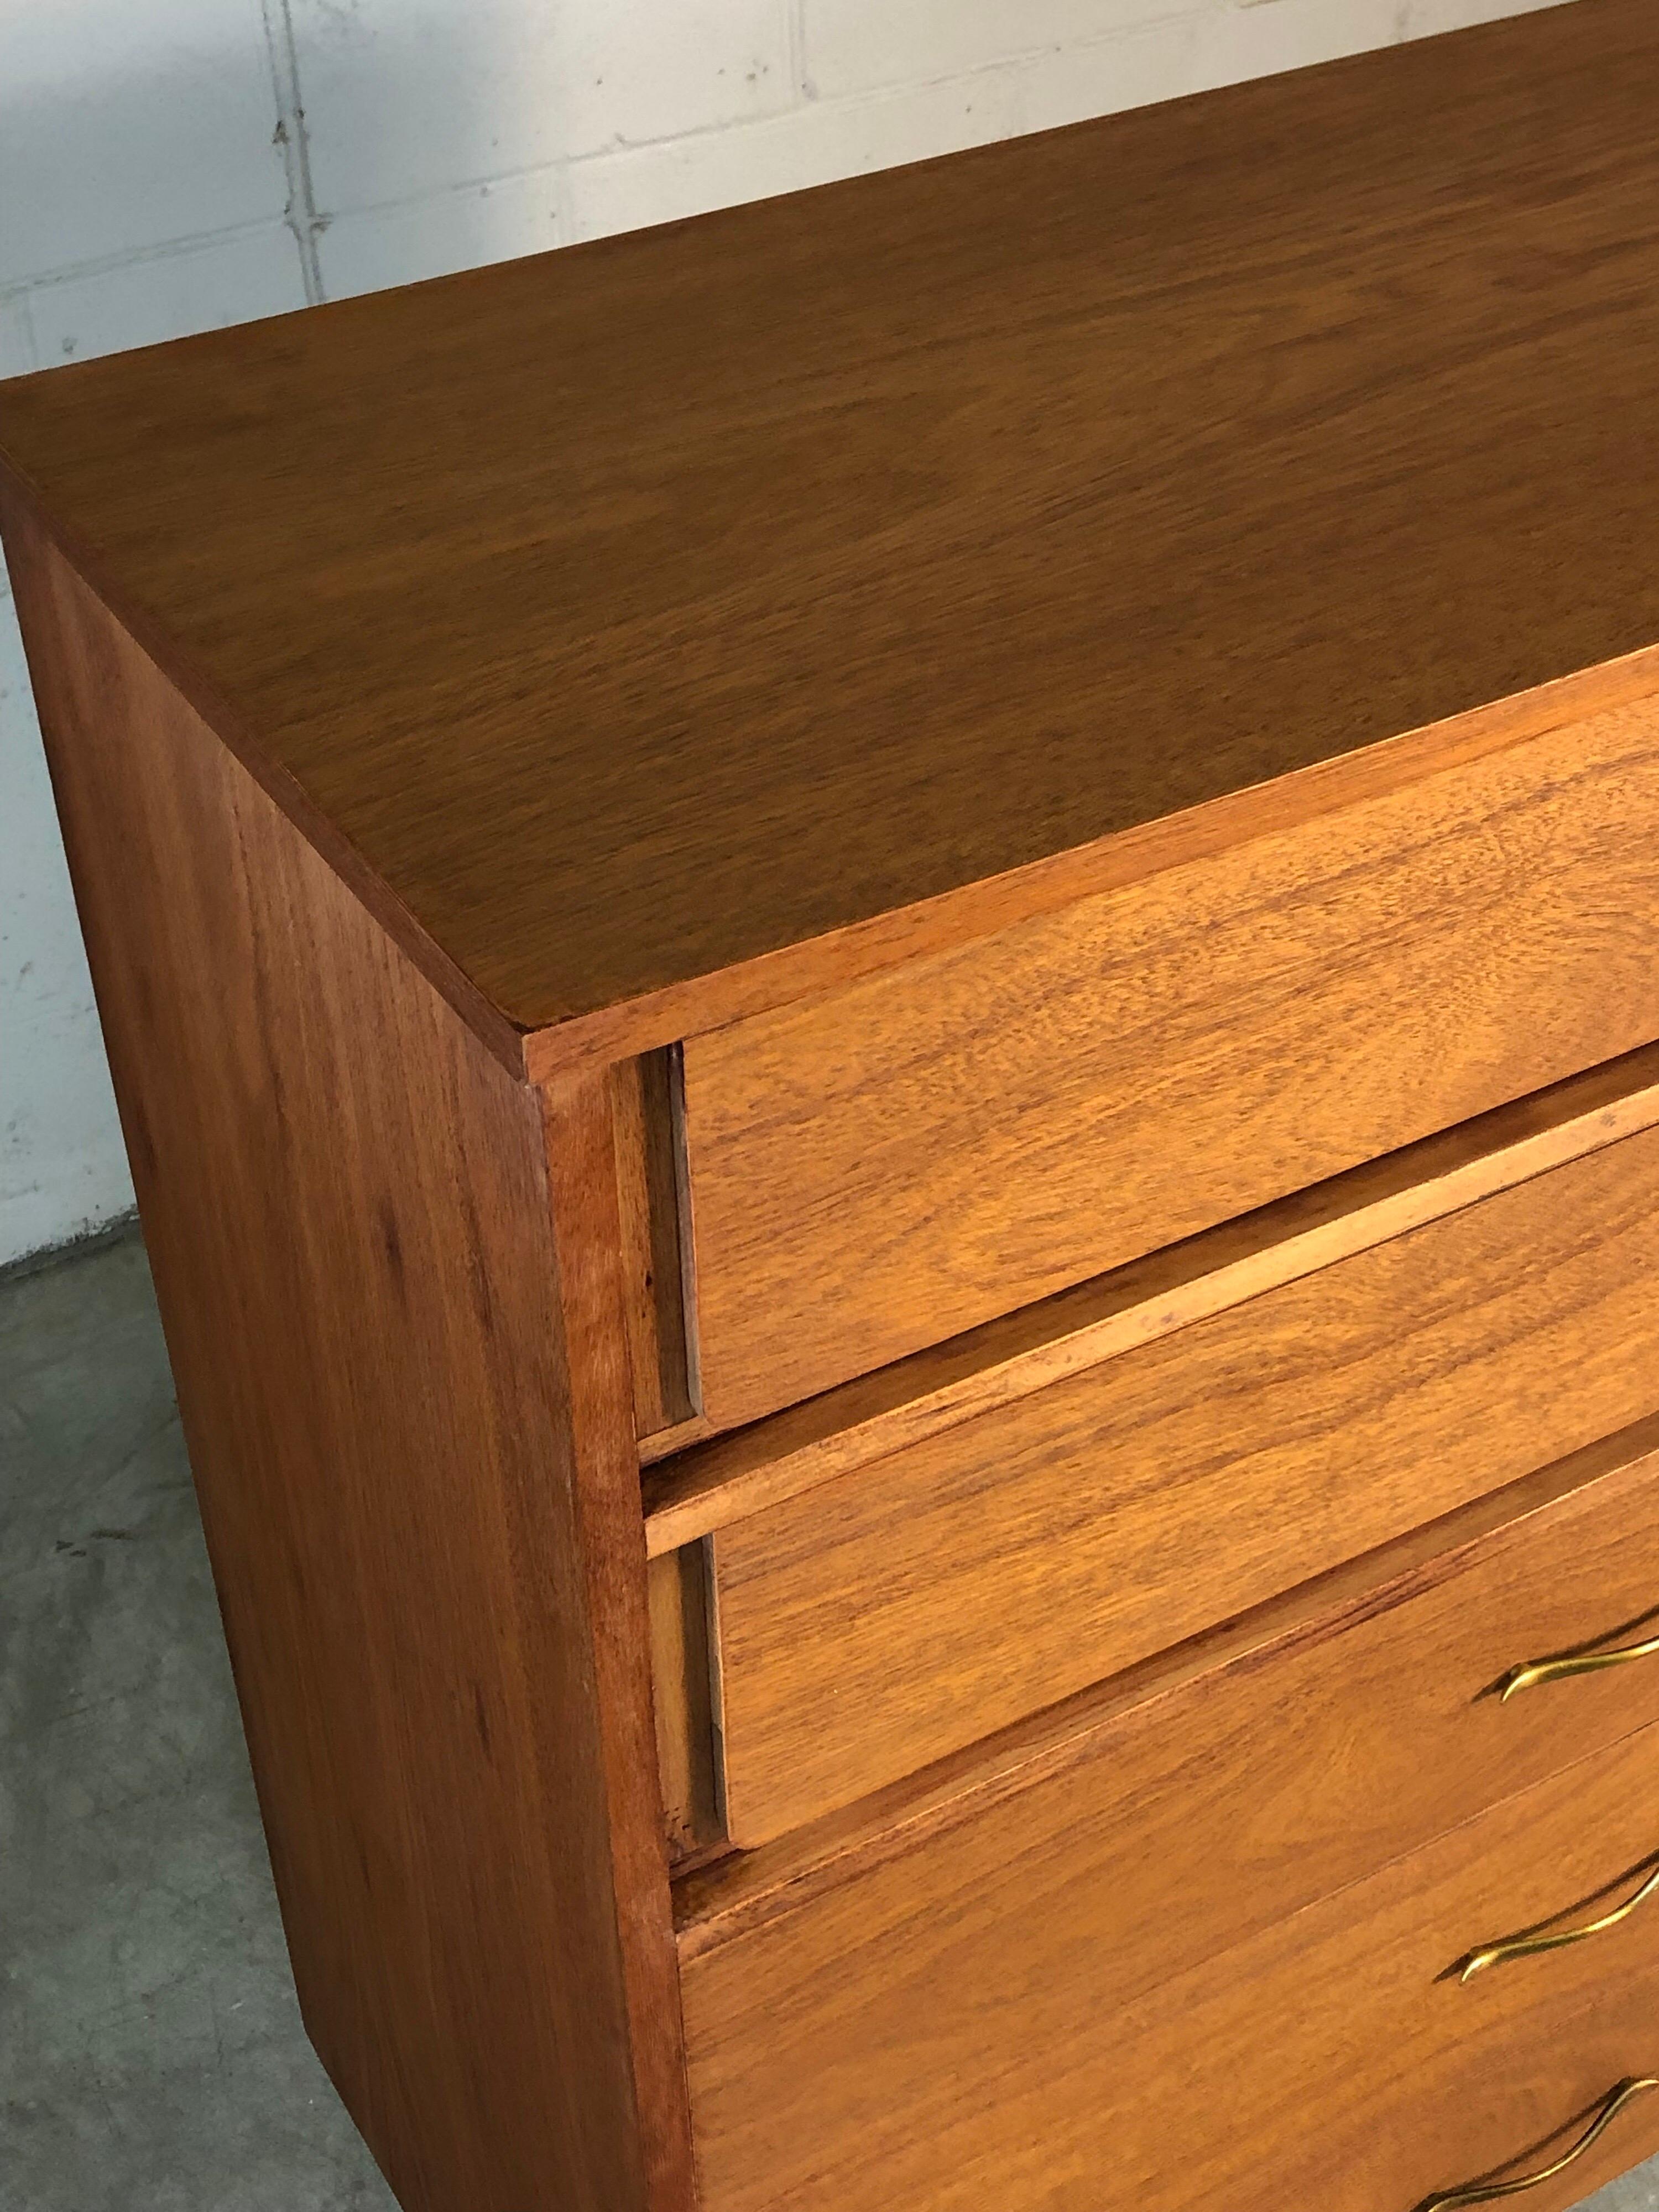 Mid-Century Modern 1960s walnut dresser with five drawers for mainline by Hooker Furniture Co. The dresser also has the original brass pulls. It is in newly refinished condition. Marked in the drawer.